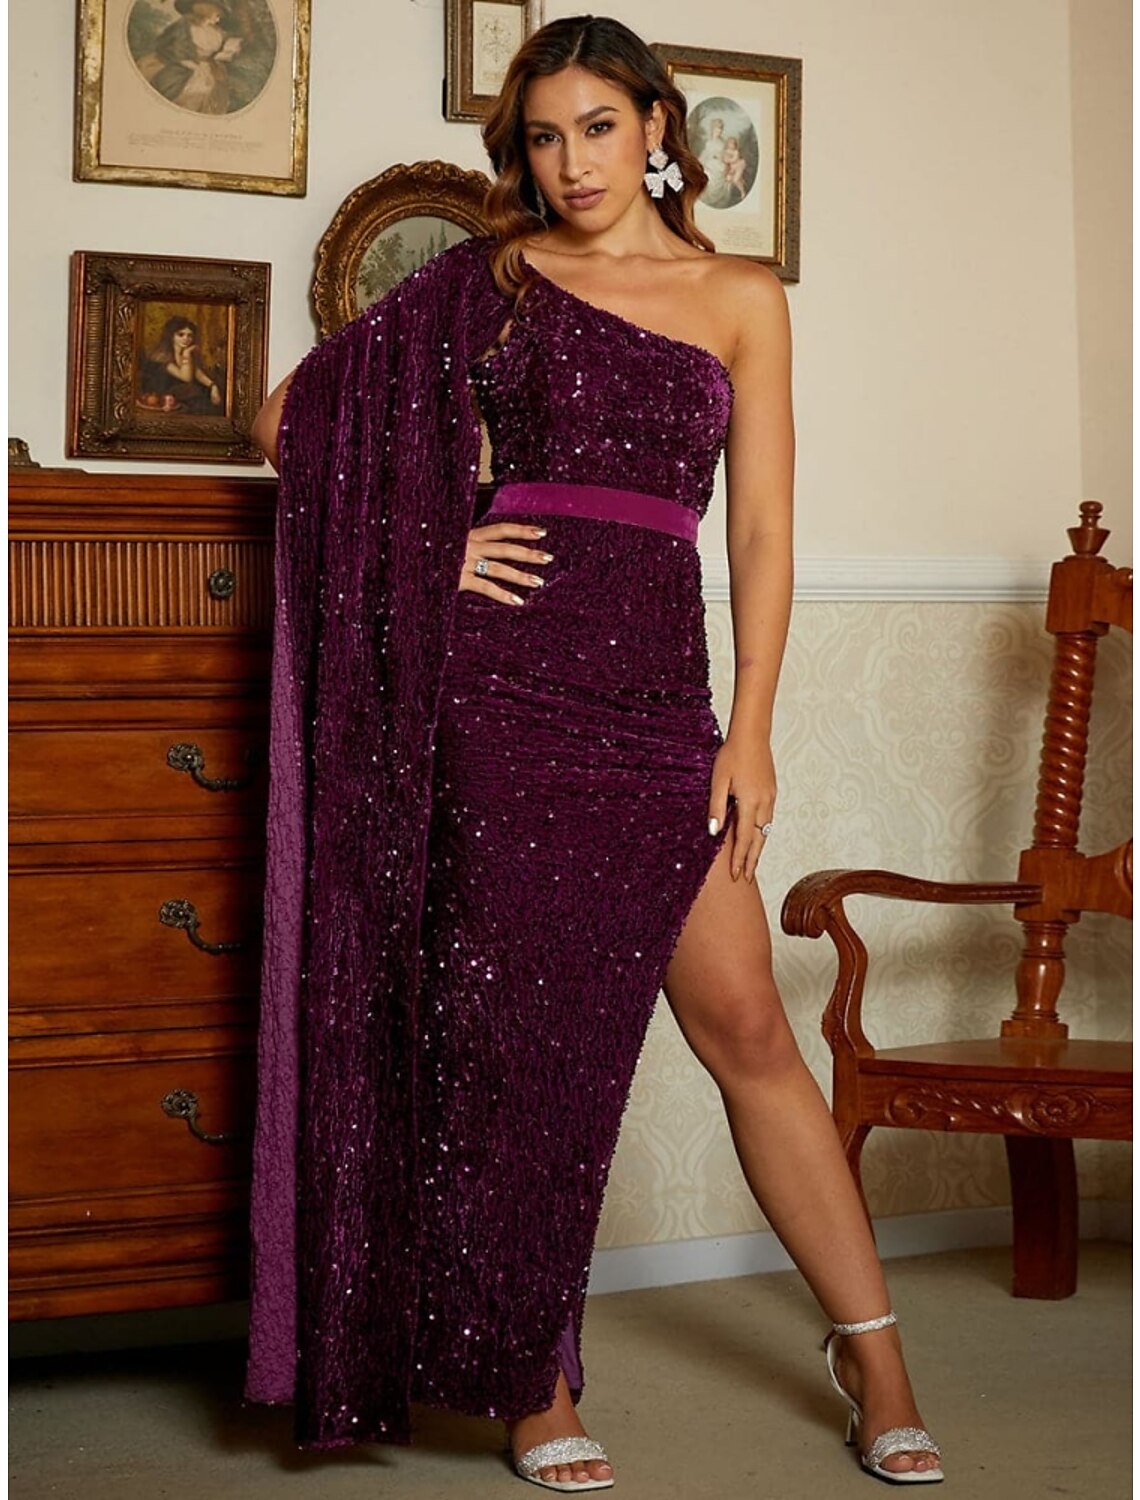 Mermaid / Trumpet Evening Gown Elegant Dress Formal Ankle Length Sleeveless One Shoulder Sequined with Glitter Slit